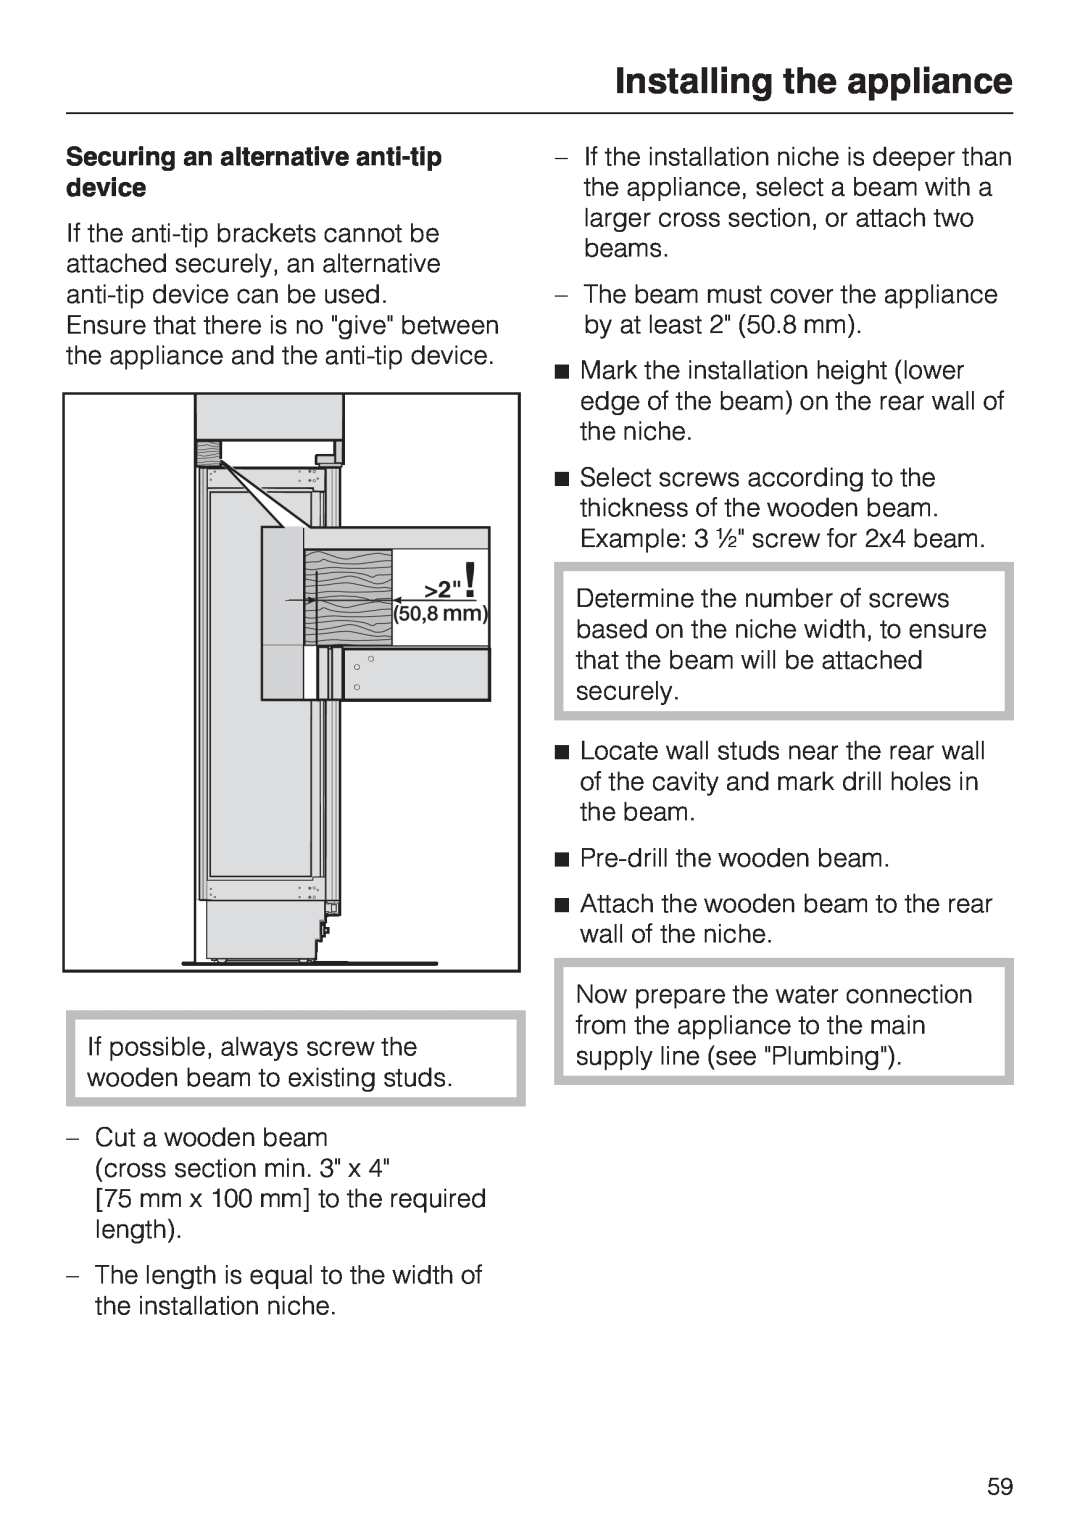 Miele F 1411 Vi installation instructions Installing the appliance, Securing an alternative anti-tipdevice 